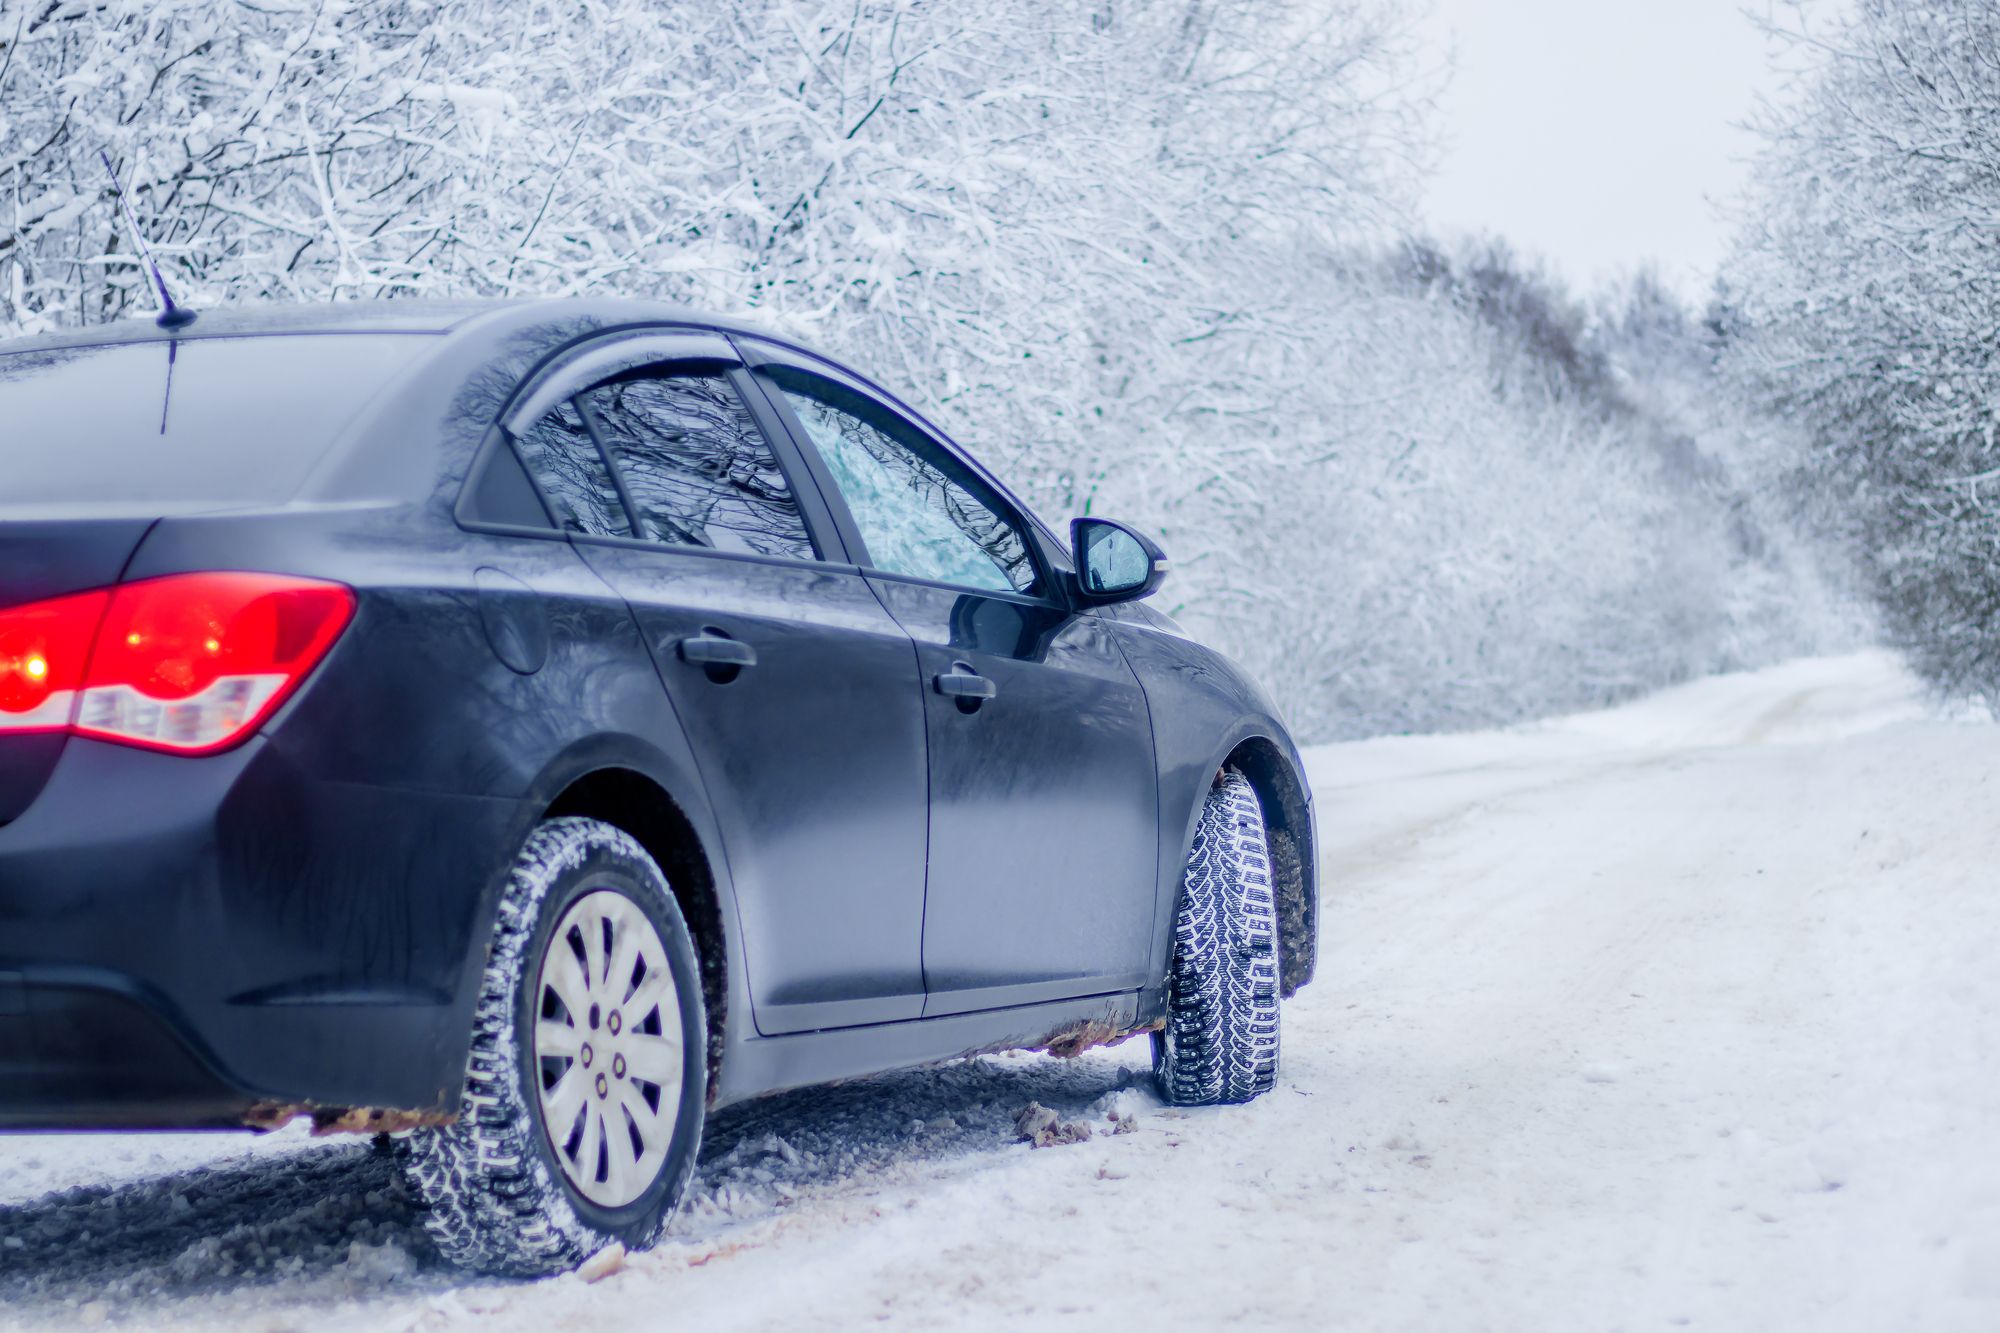 How To Protect Your Car From Winter Weather